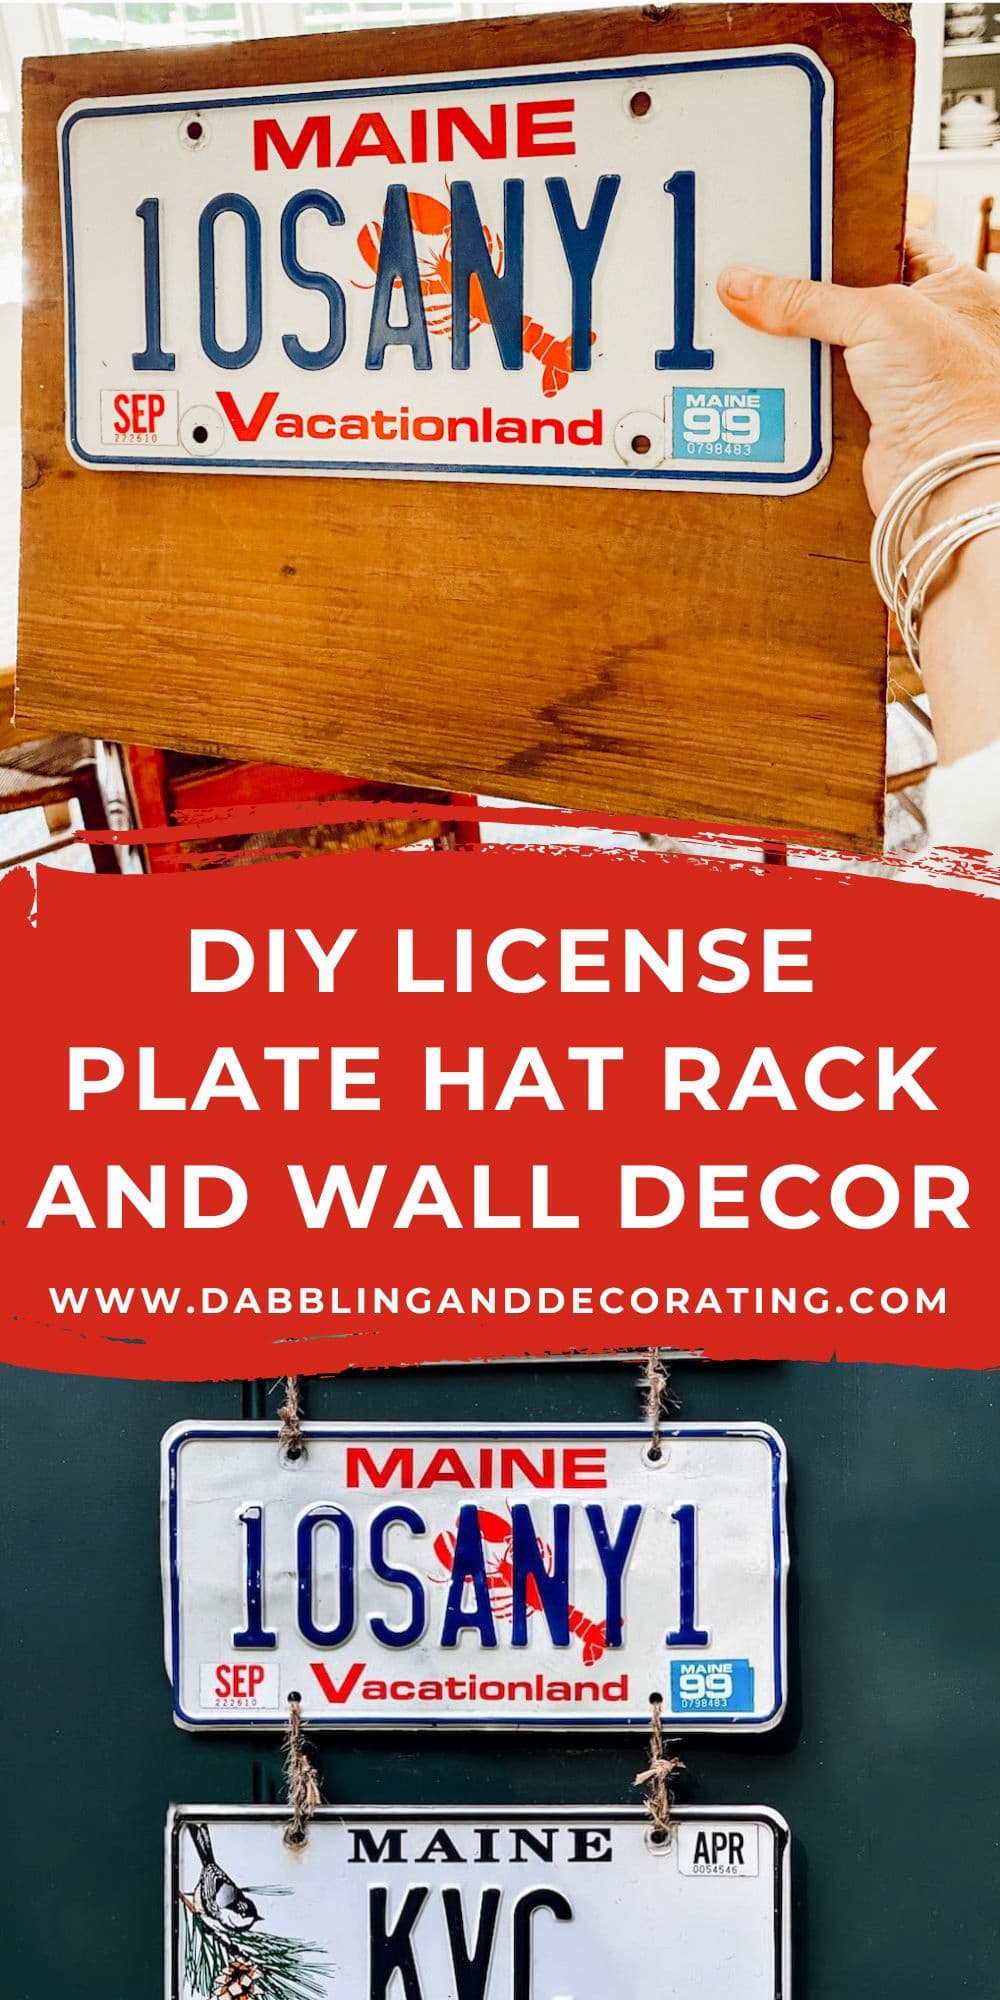 DIY License Plate Hat Rack and Wall Decor